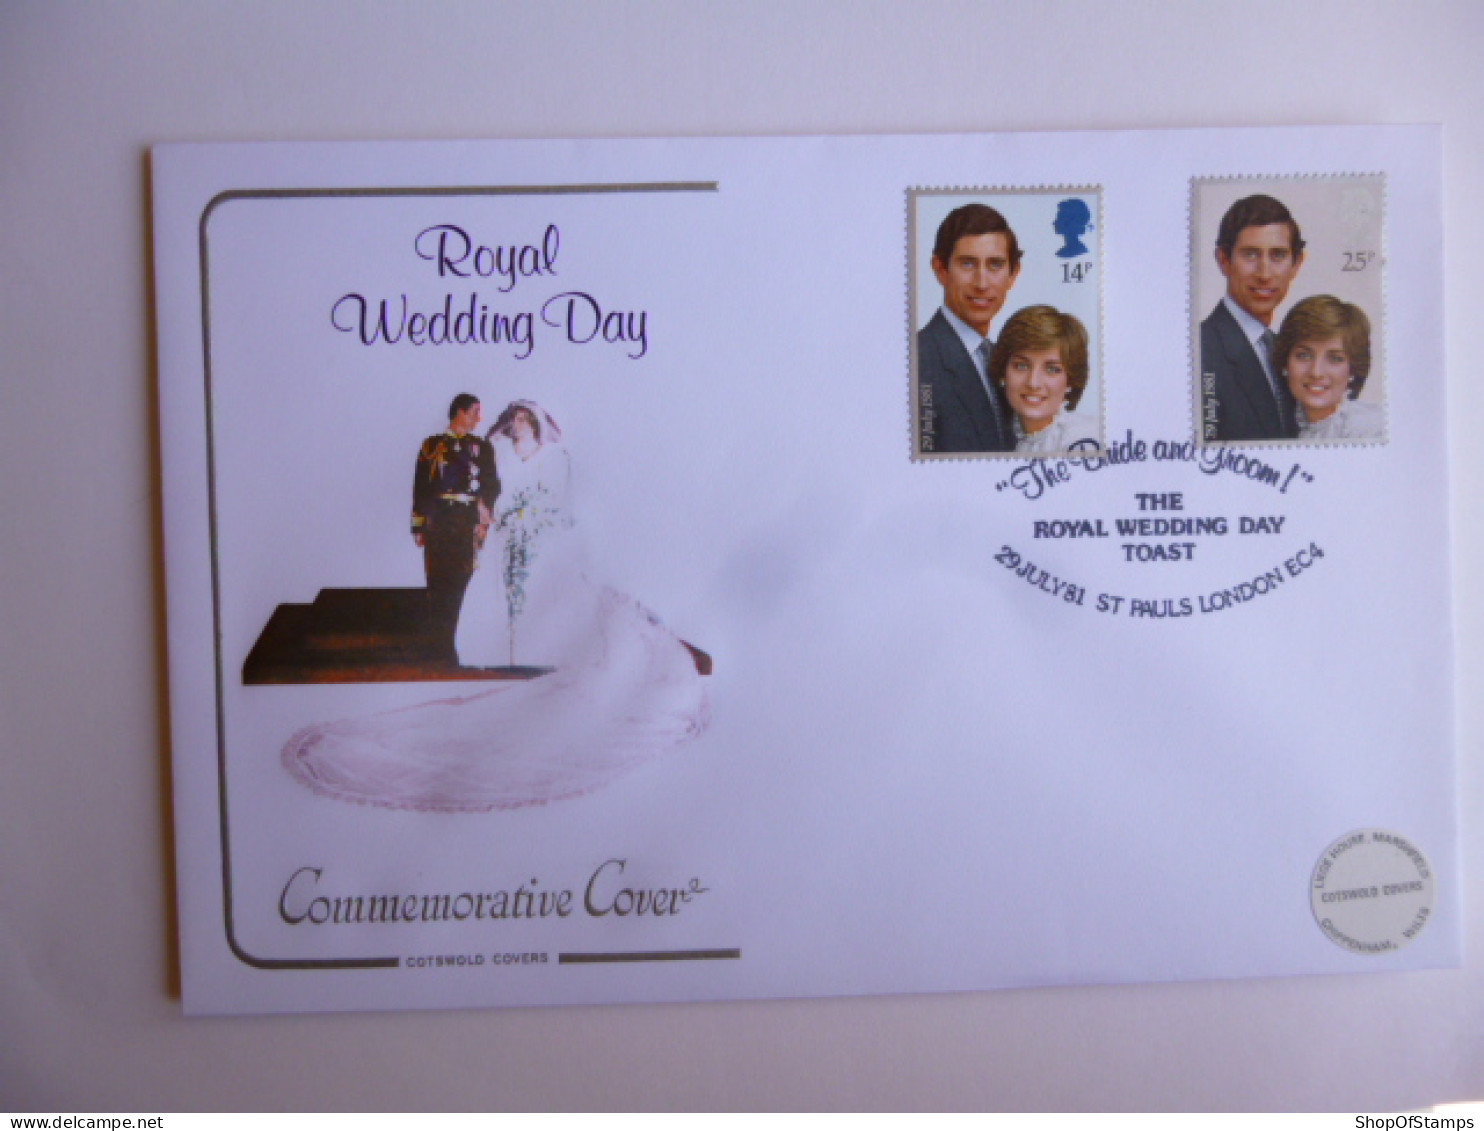 GREAT BRITAIN SG 1160-61 ROYAL WEDDING   FDC THE ROYAL WEDDING DAY TOAST ST PAUL'S LONDON - Unclassified